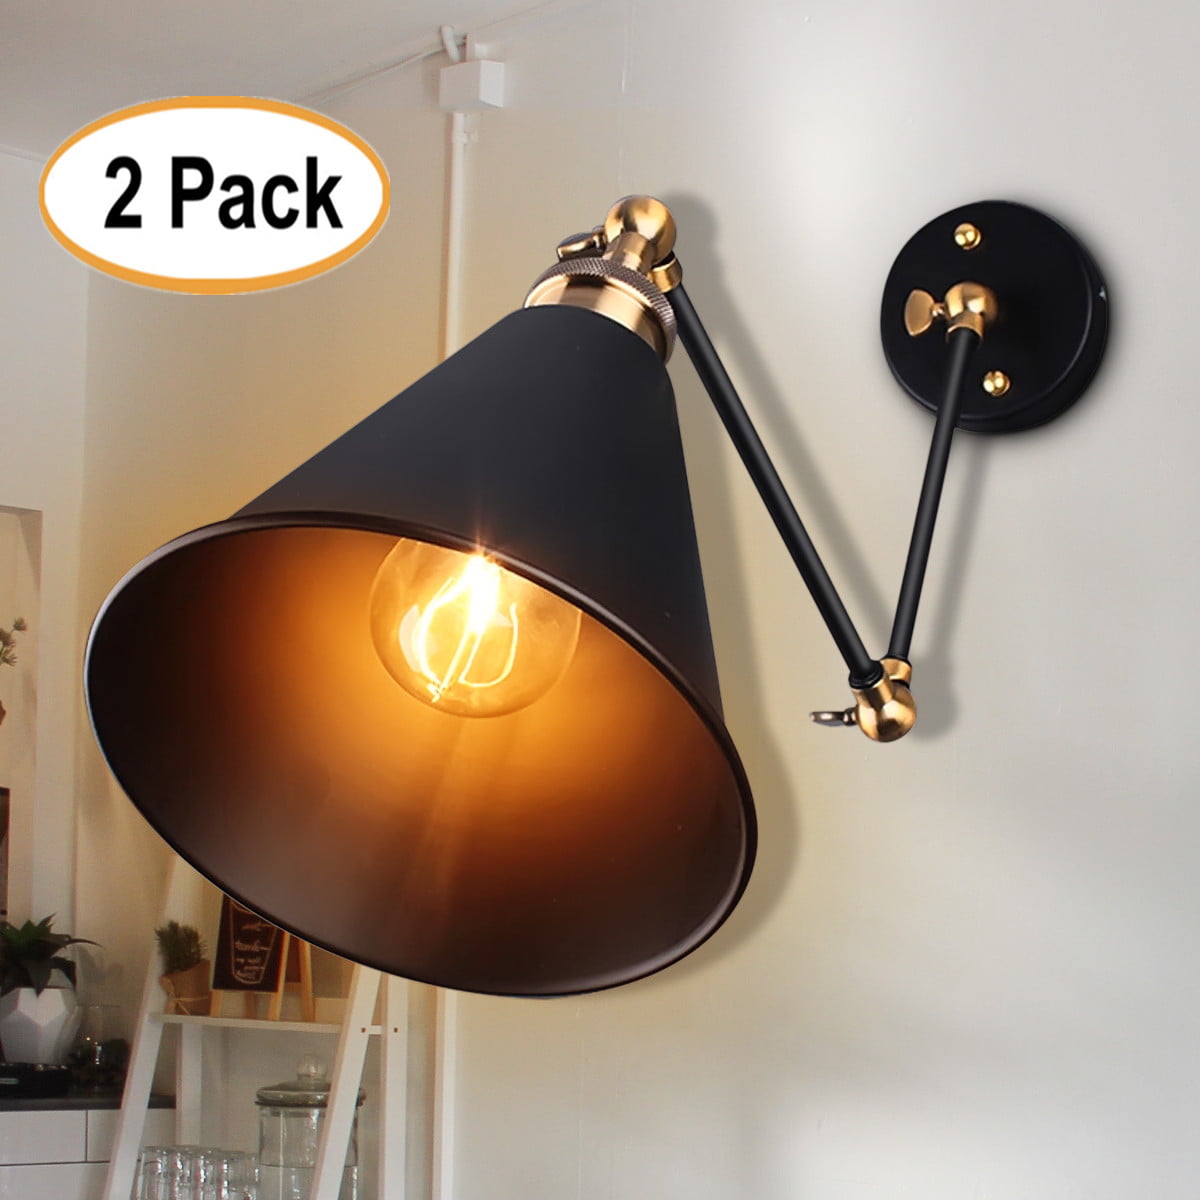 Retro Wall Lamp Industrial Swing Arm Sconce Plug in Wall Light Fixture Bedroom 